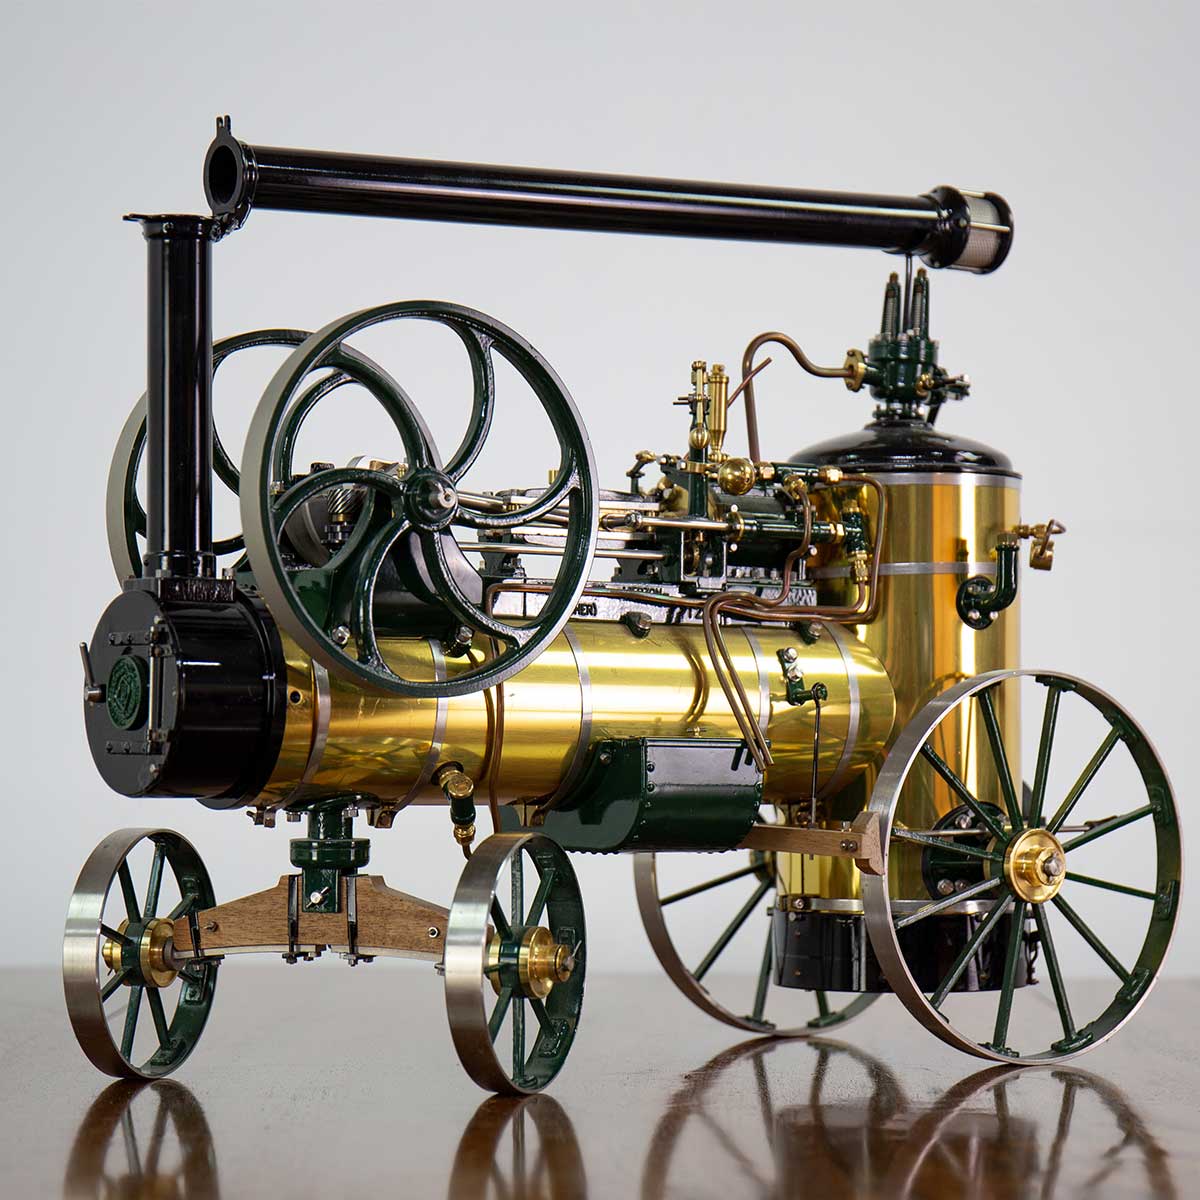 Toys, Model Engines & Pop Culture